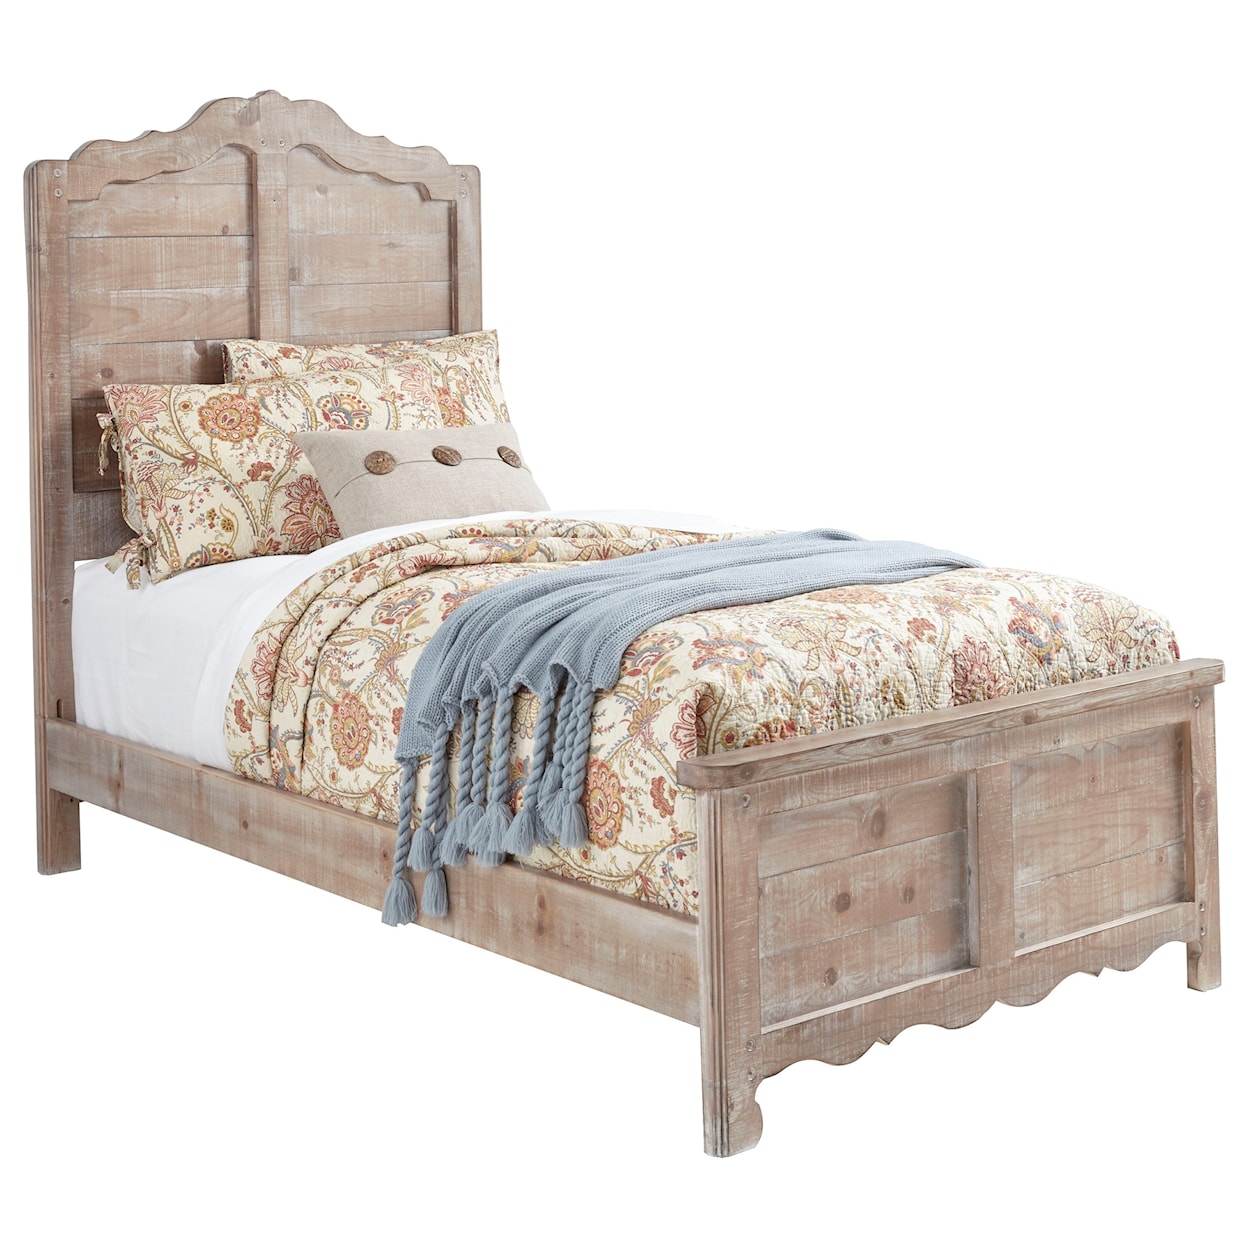 Carolina Chairs Chatsworth Complete Full Panel Bed